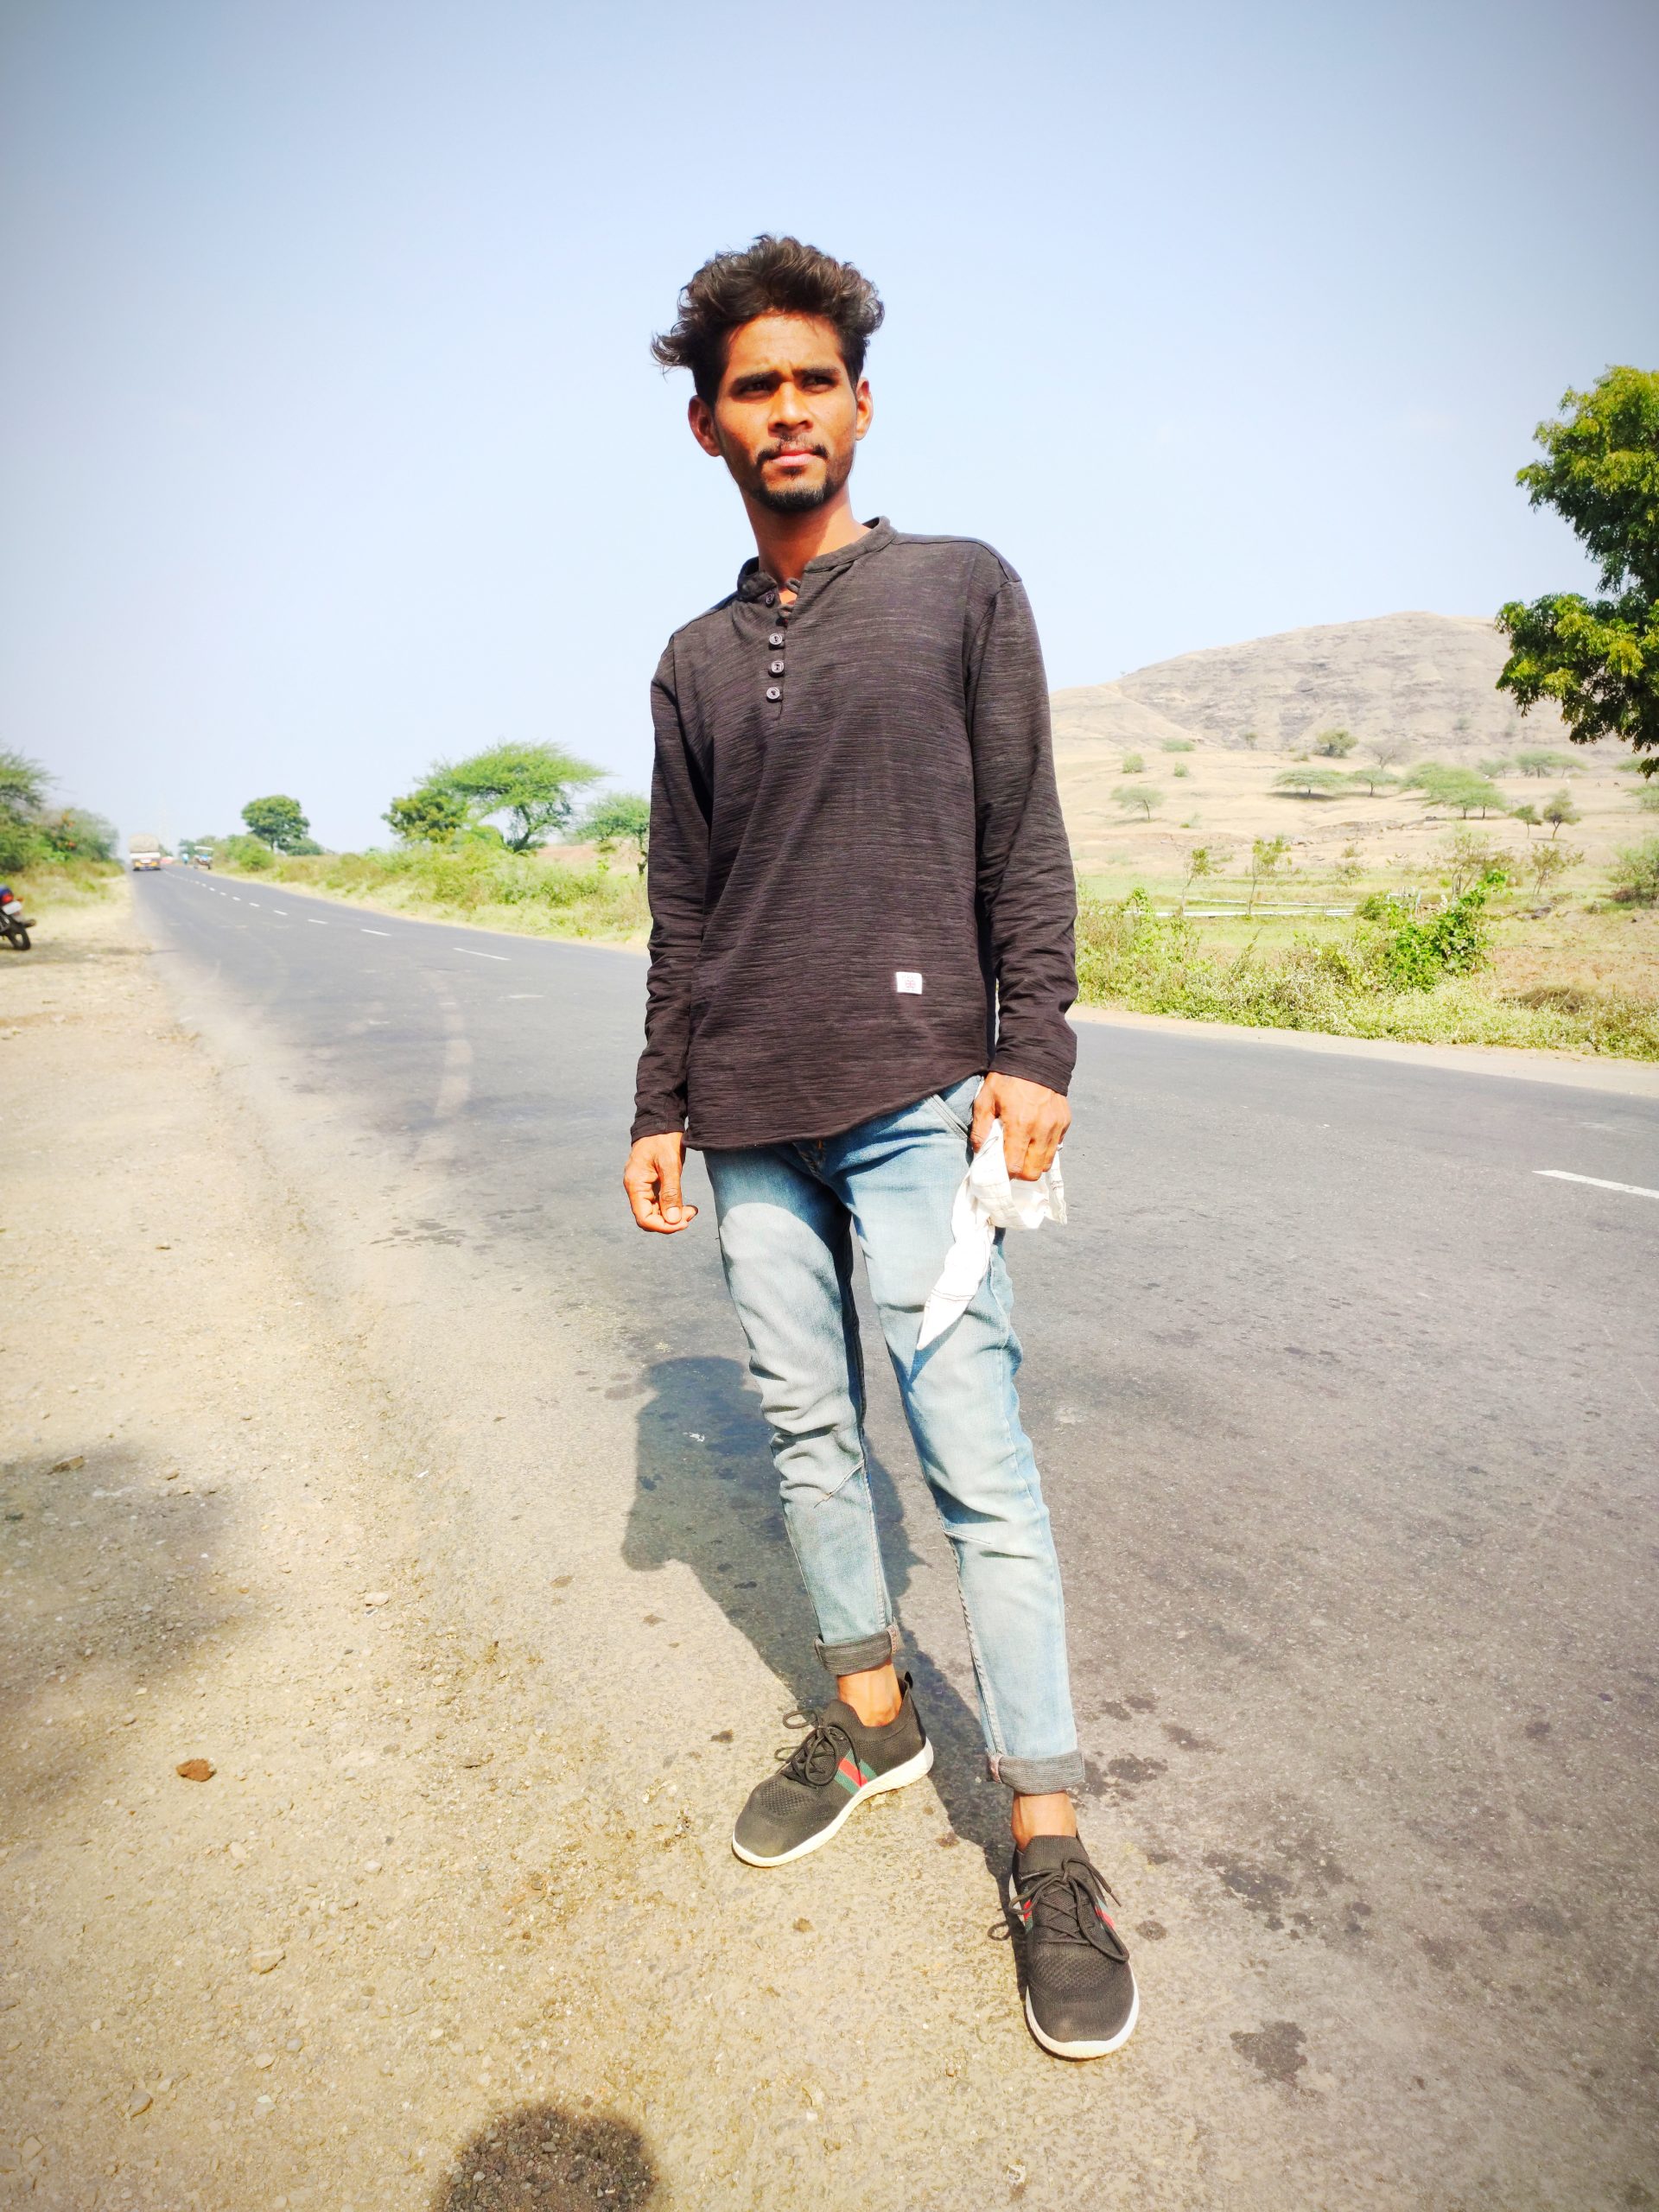 A boy standing on a road